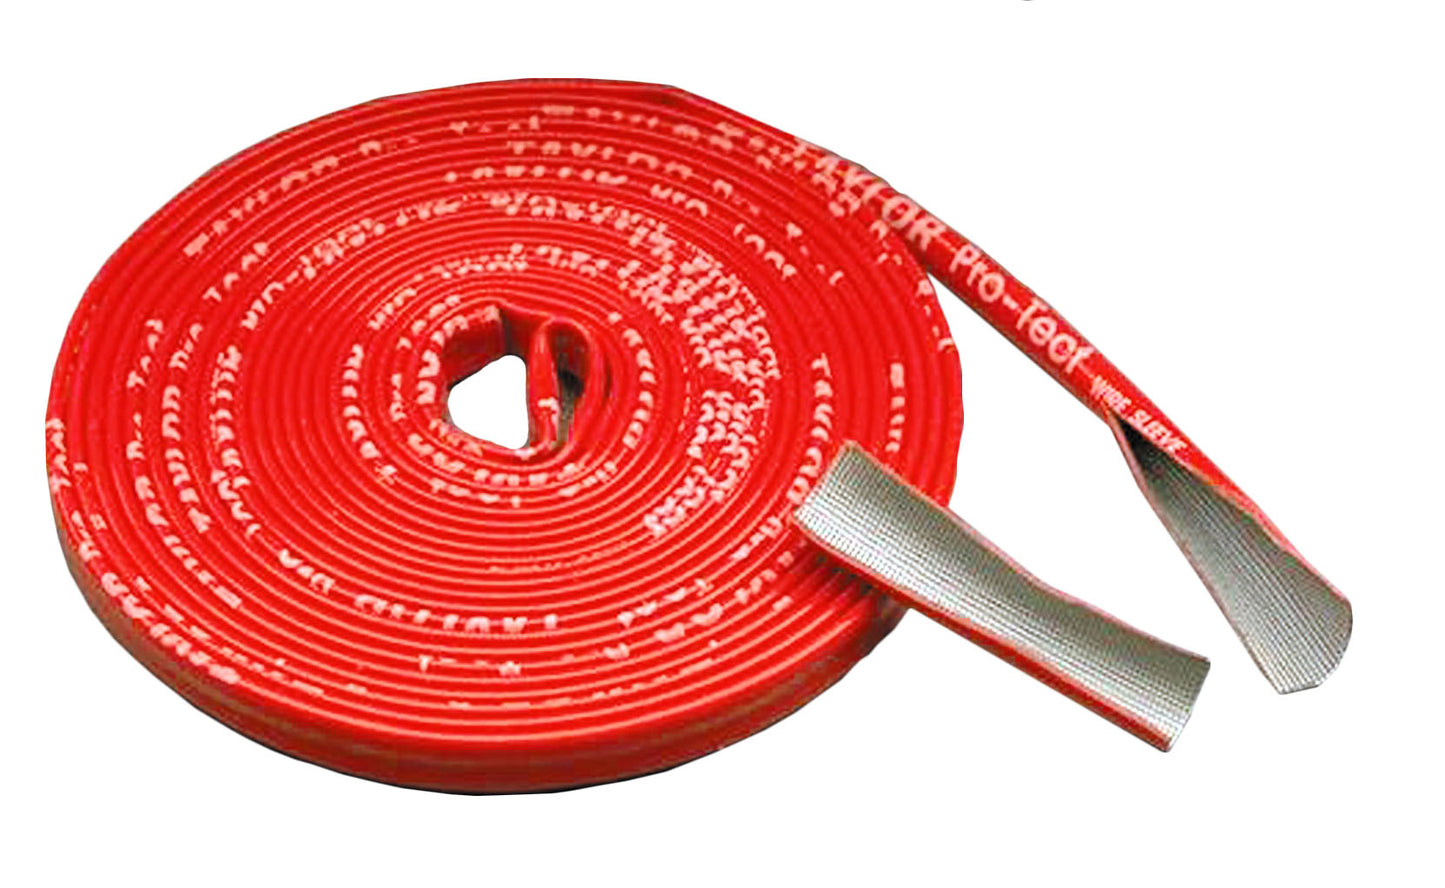 Taylor Cable  2525 Pro-Tect Wire Sleeving 25ft coil